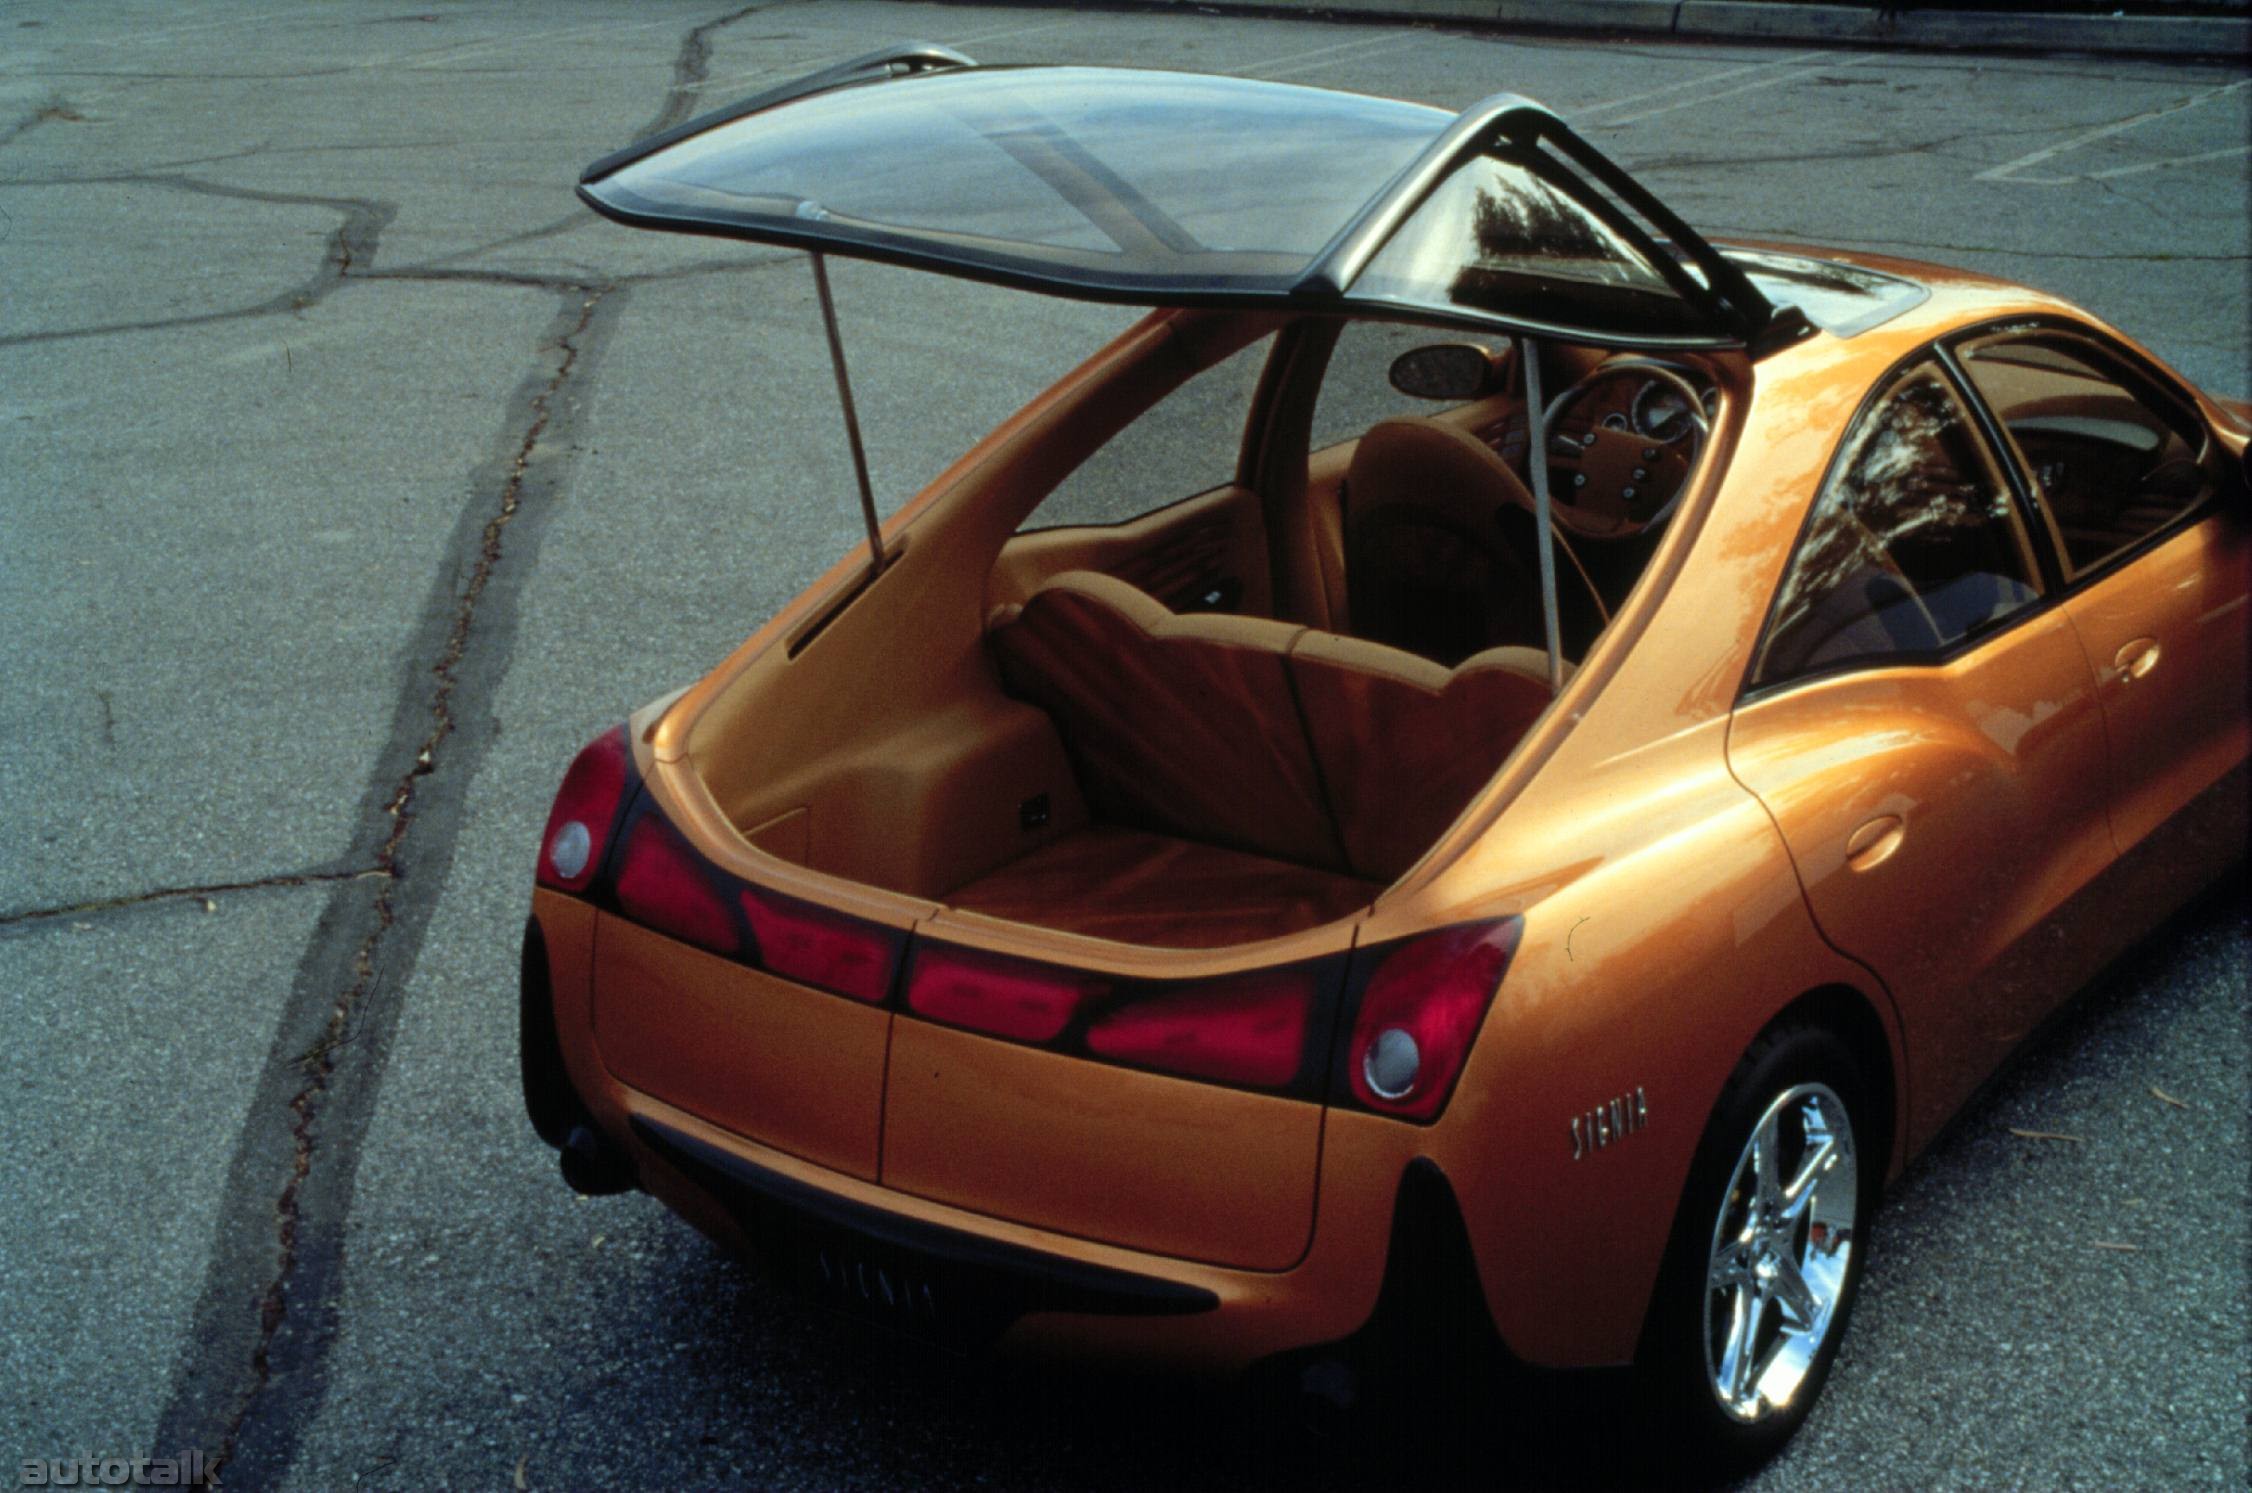 Buick Signia Concept Vehicle